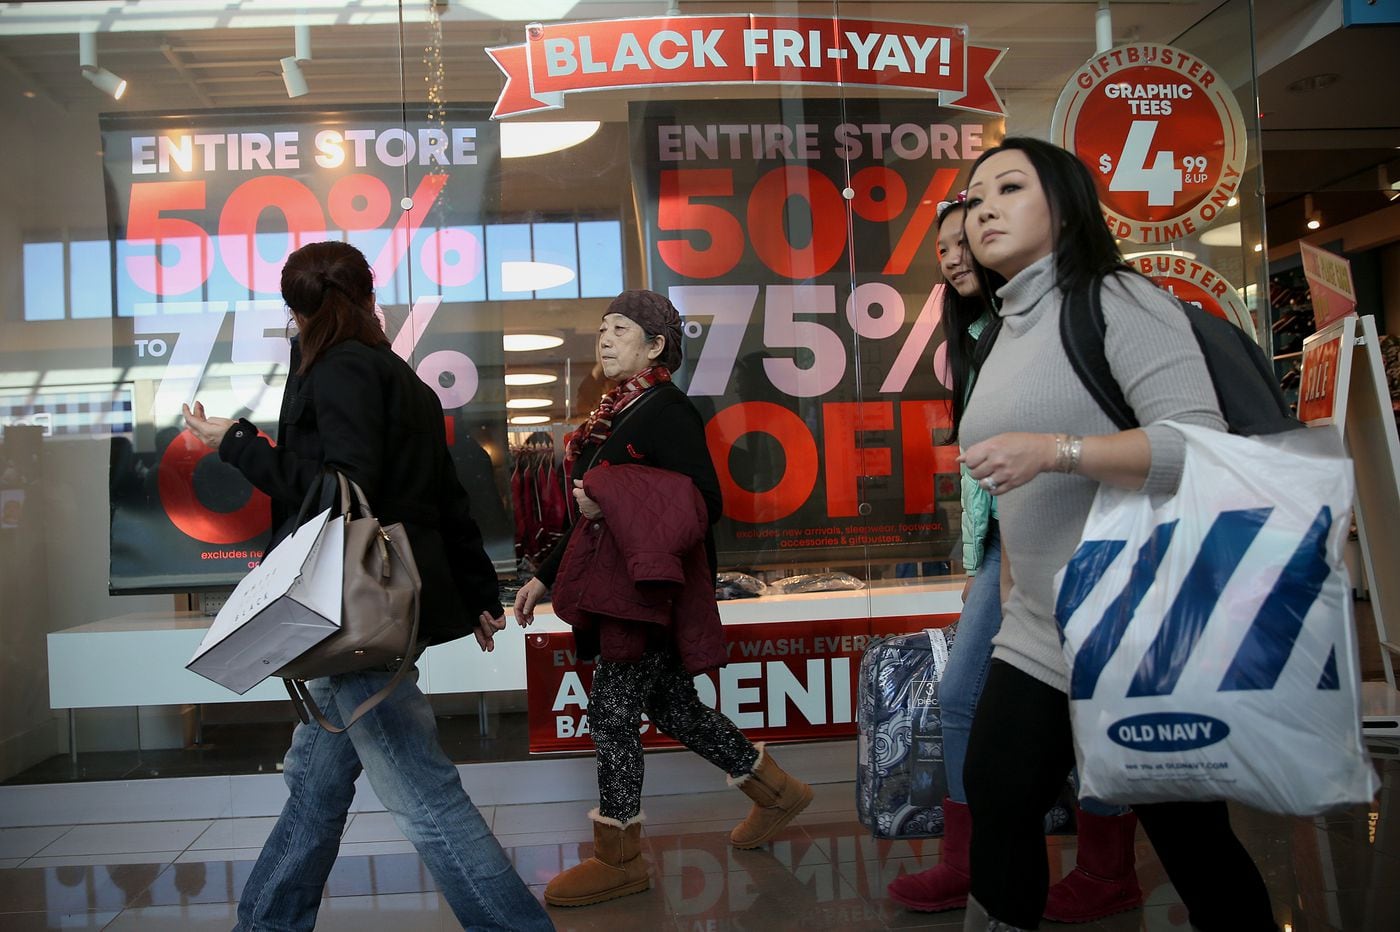 The Booming Black Friday Weekend Had More Shoppers On Smartphones And In Stores